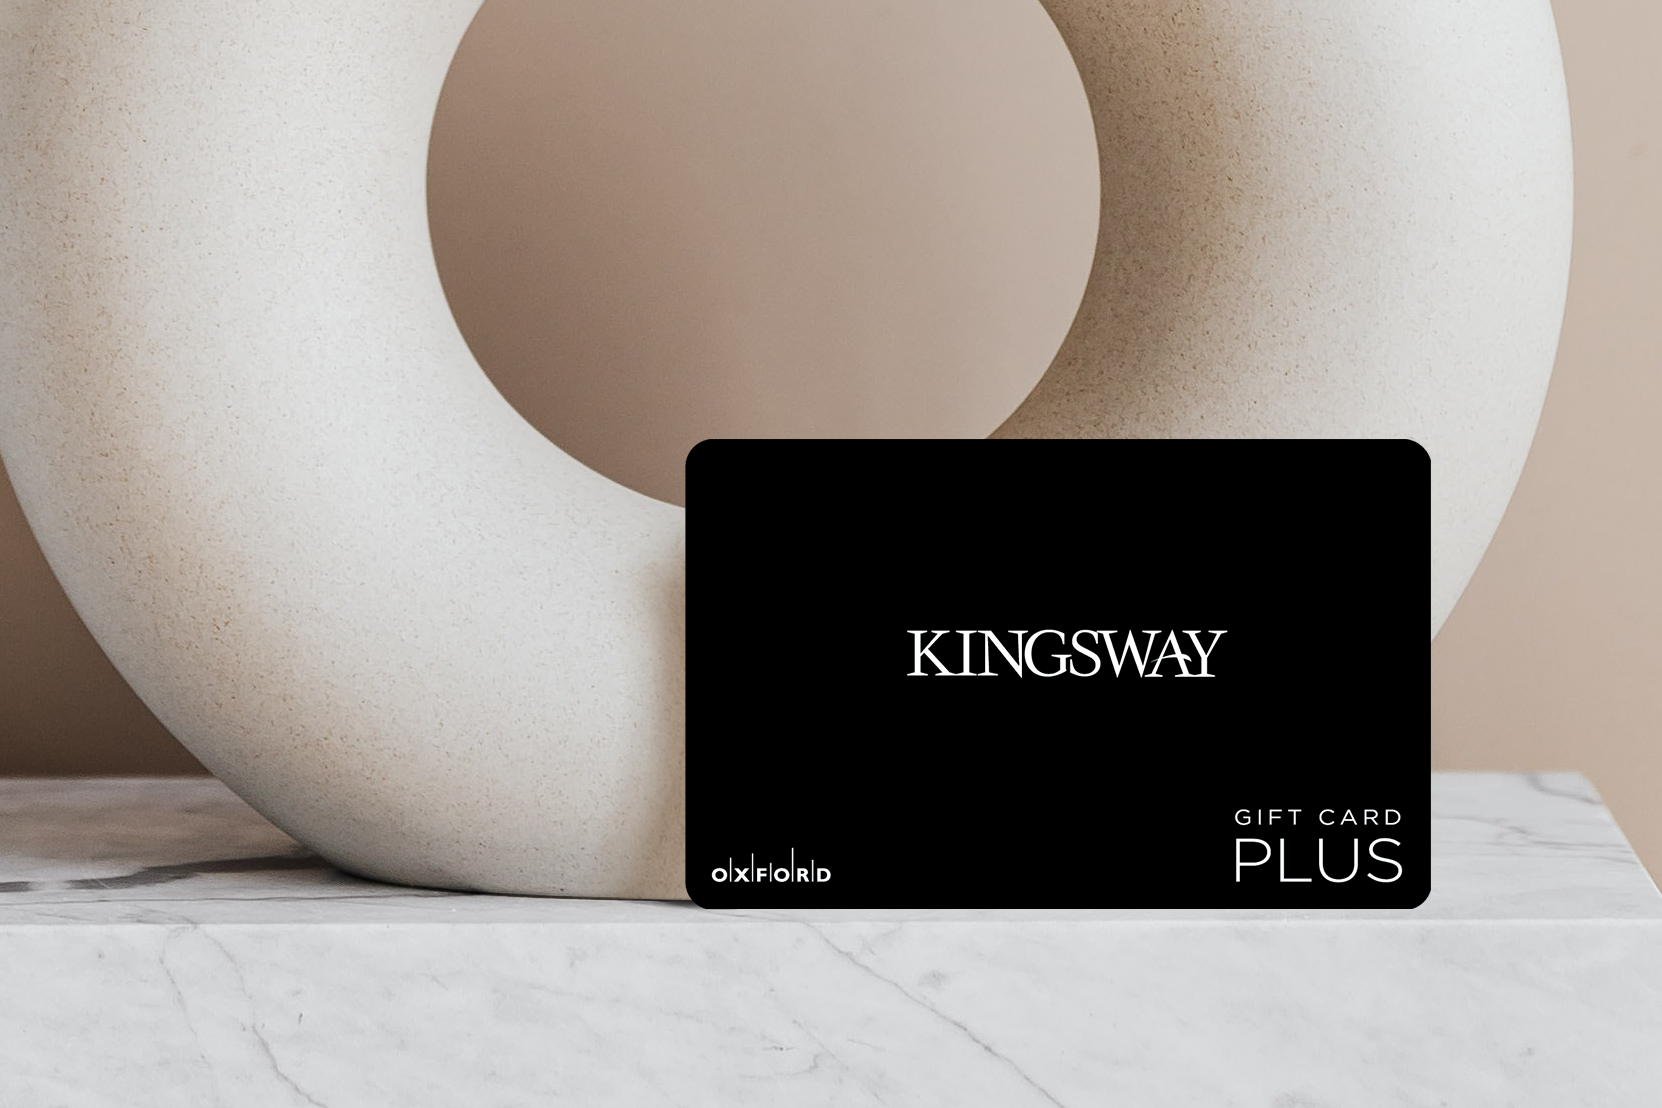 a promotional image of a black Kingsway gift card in front of a neutral circular vase